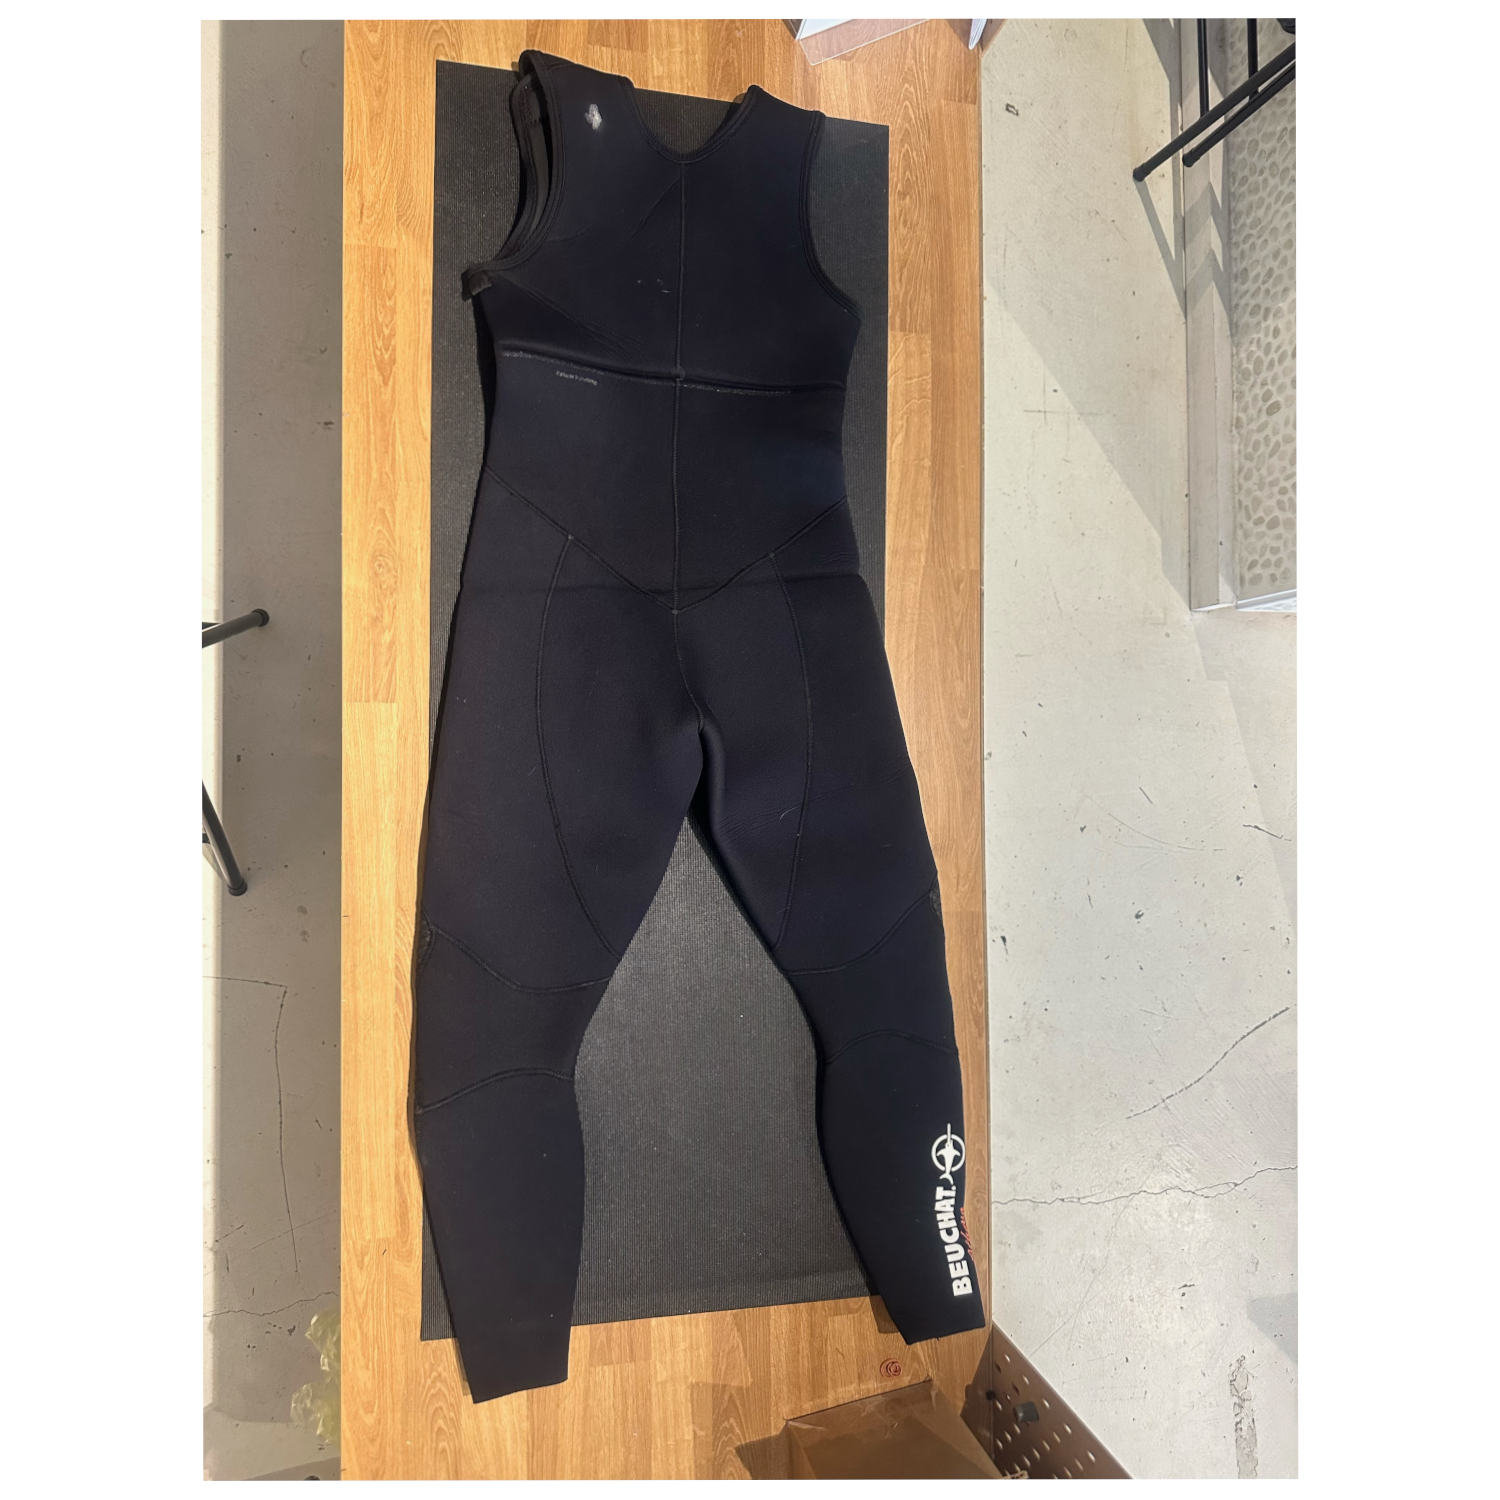 Beuchat Athena Lady Pant 7mm Used Size M | Diving Sports Canada | Vancouver